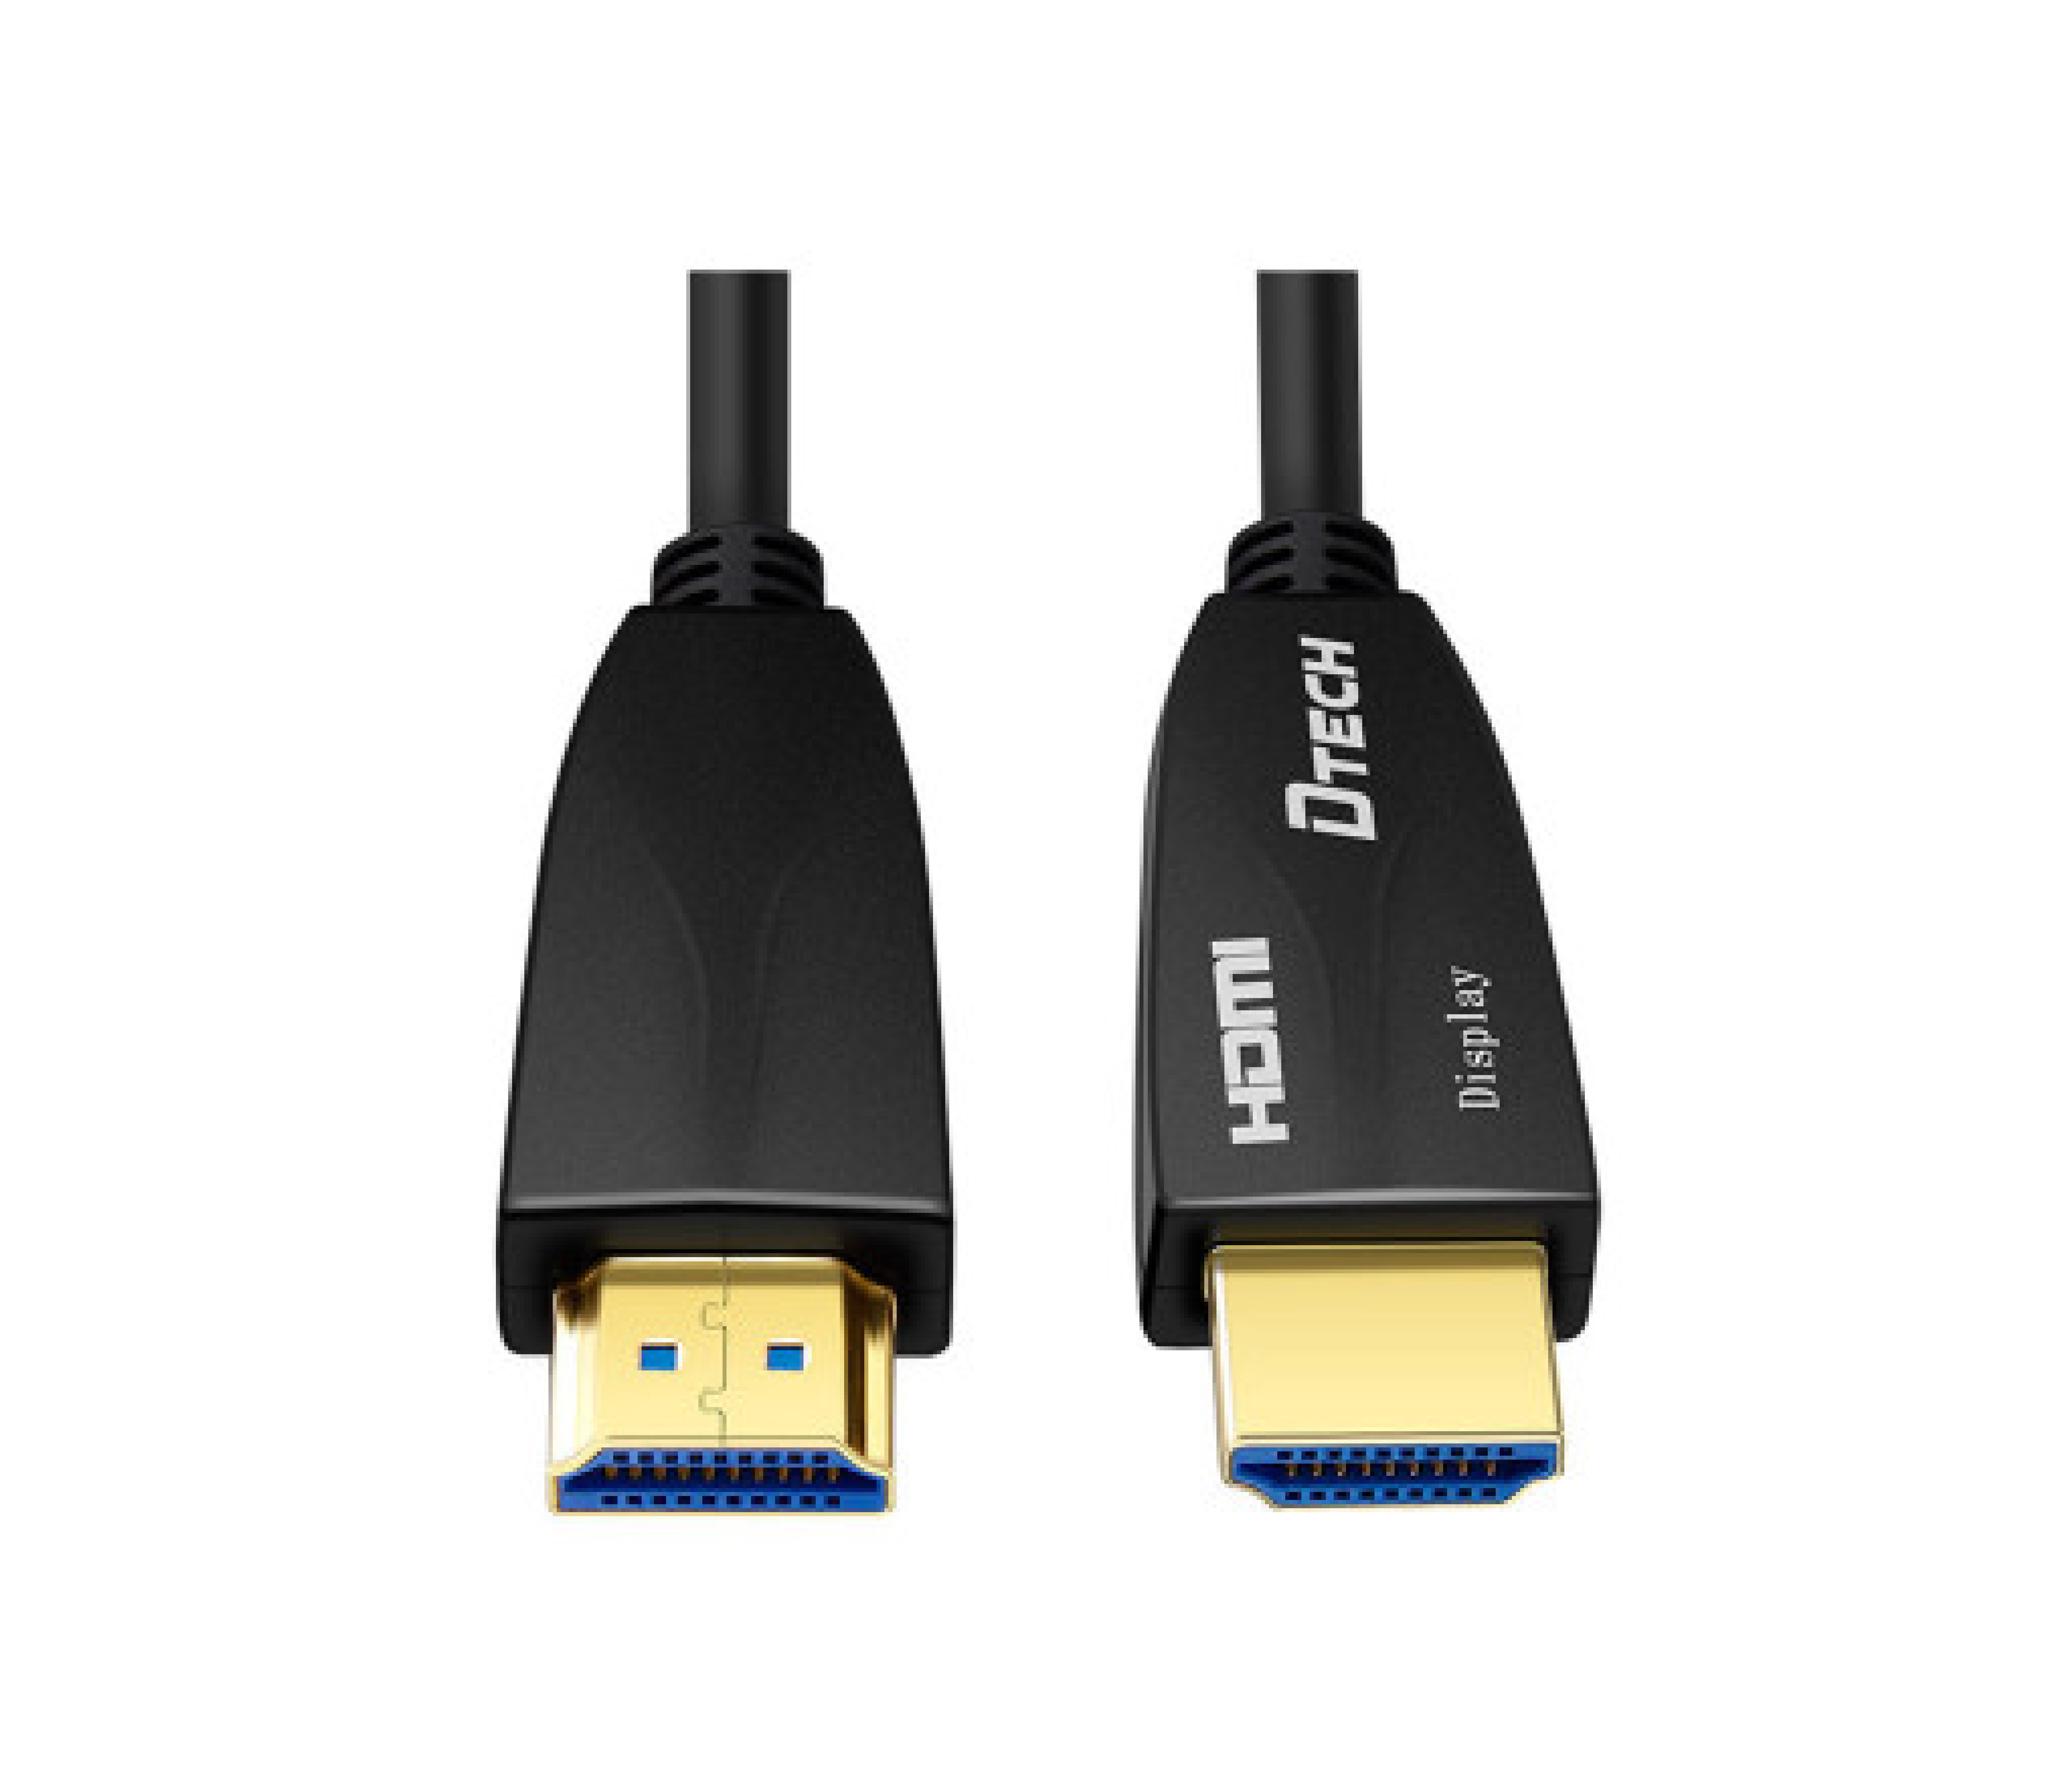 DTECH DT-HF2025 Cable HDMI